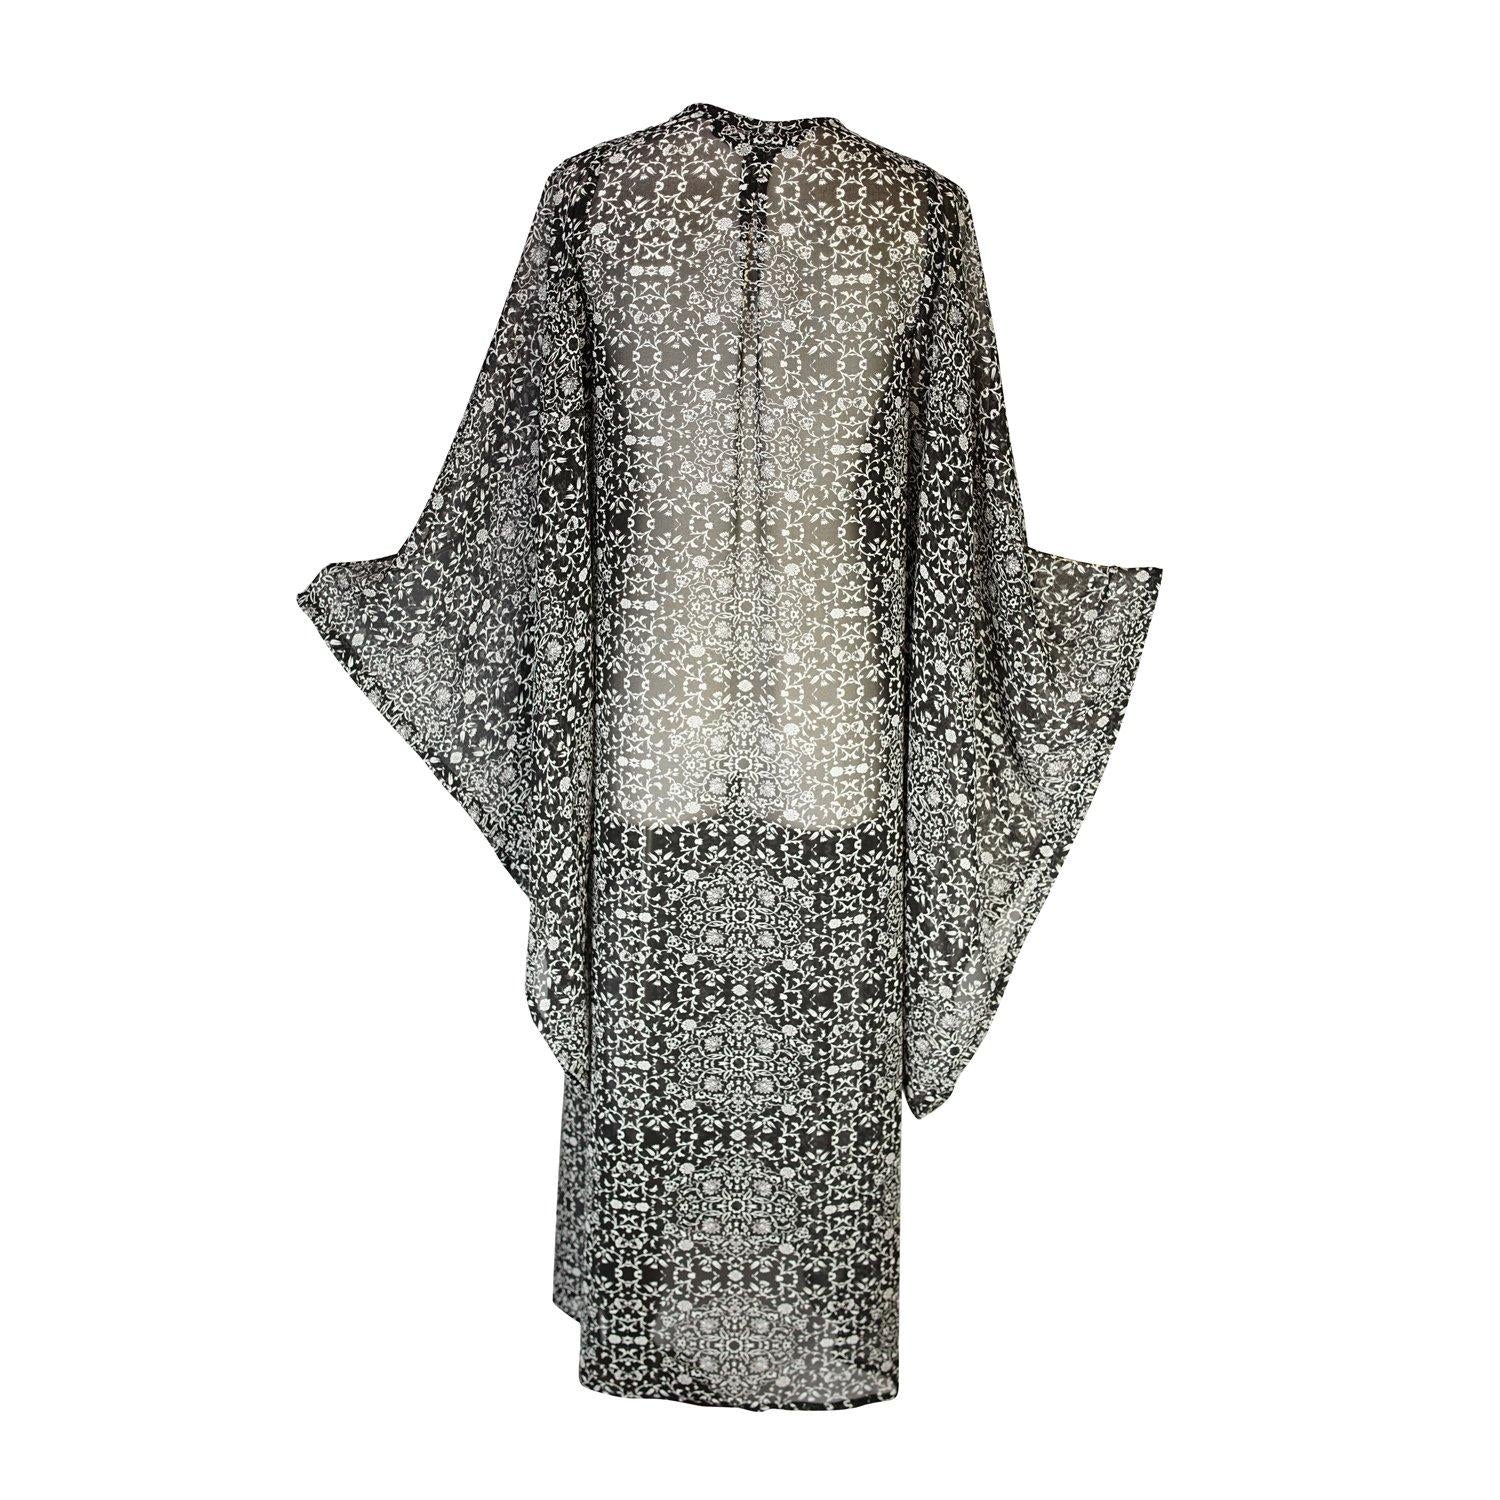 Long sleeve kimono with ankle length hem is made from a soft semi-sheer rayon chiffon. Featuring a black and white victorian floral pattern. It also features pockets, deep v-neck when tied shut, and a matching waist tie-you can style this piece in at least 10 ways.